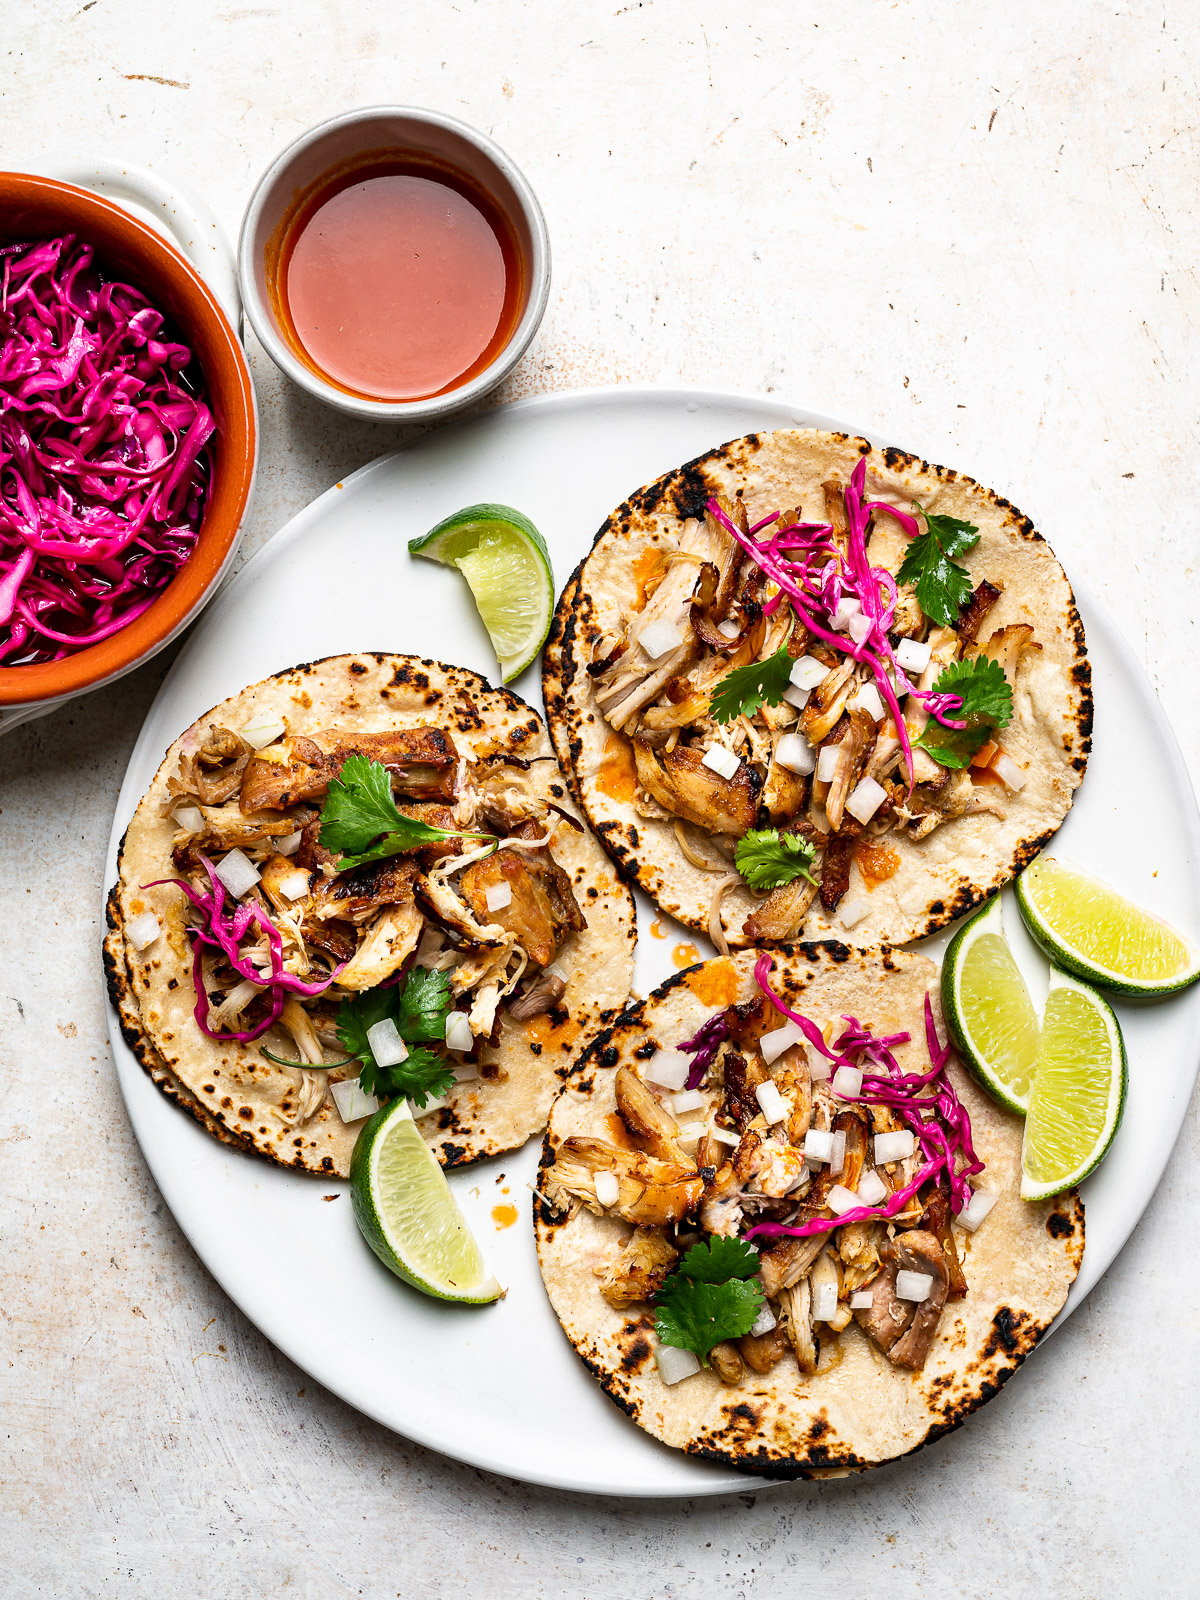 carnitas served on warm corn tortillas topped with onion and pickled red cabbage